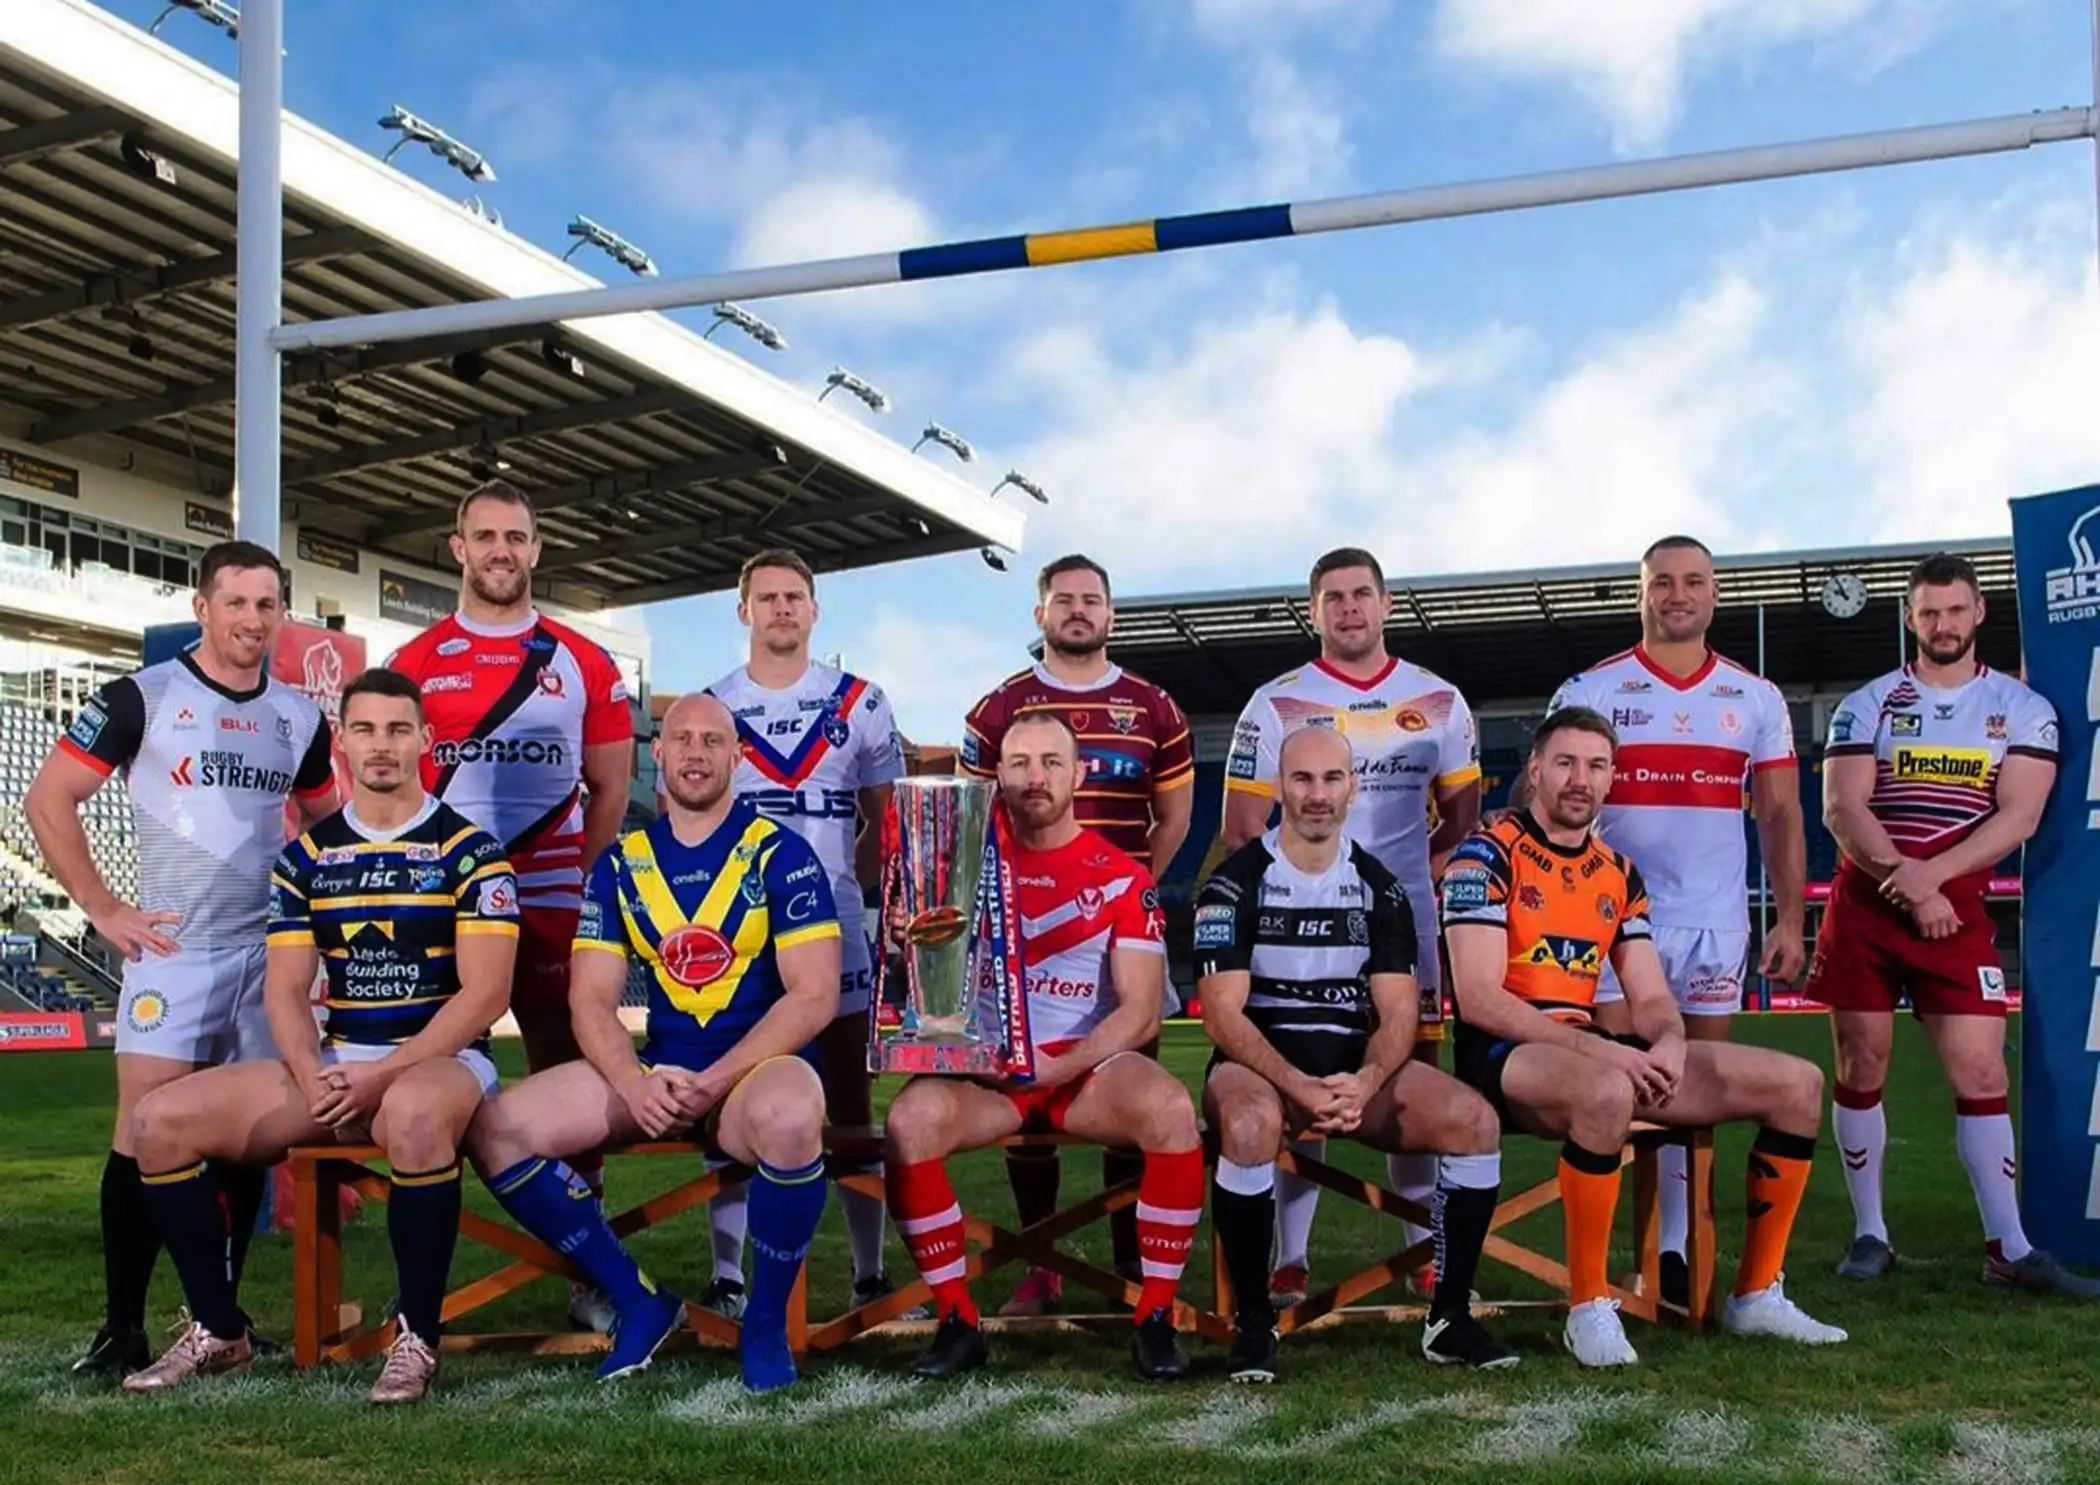 Where were we? How Super League was shaping up before lockdown